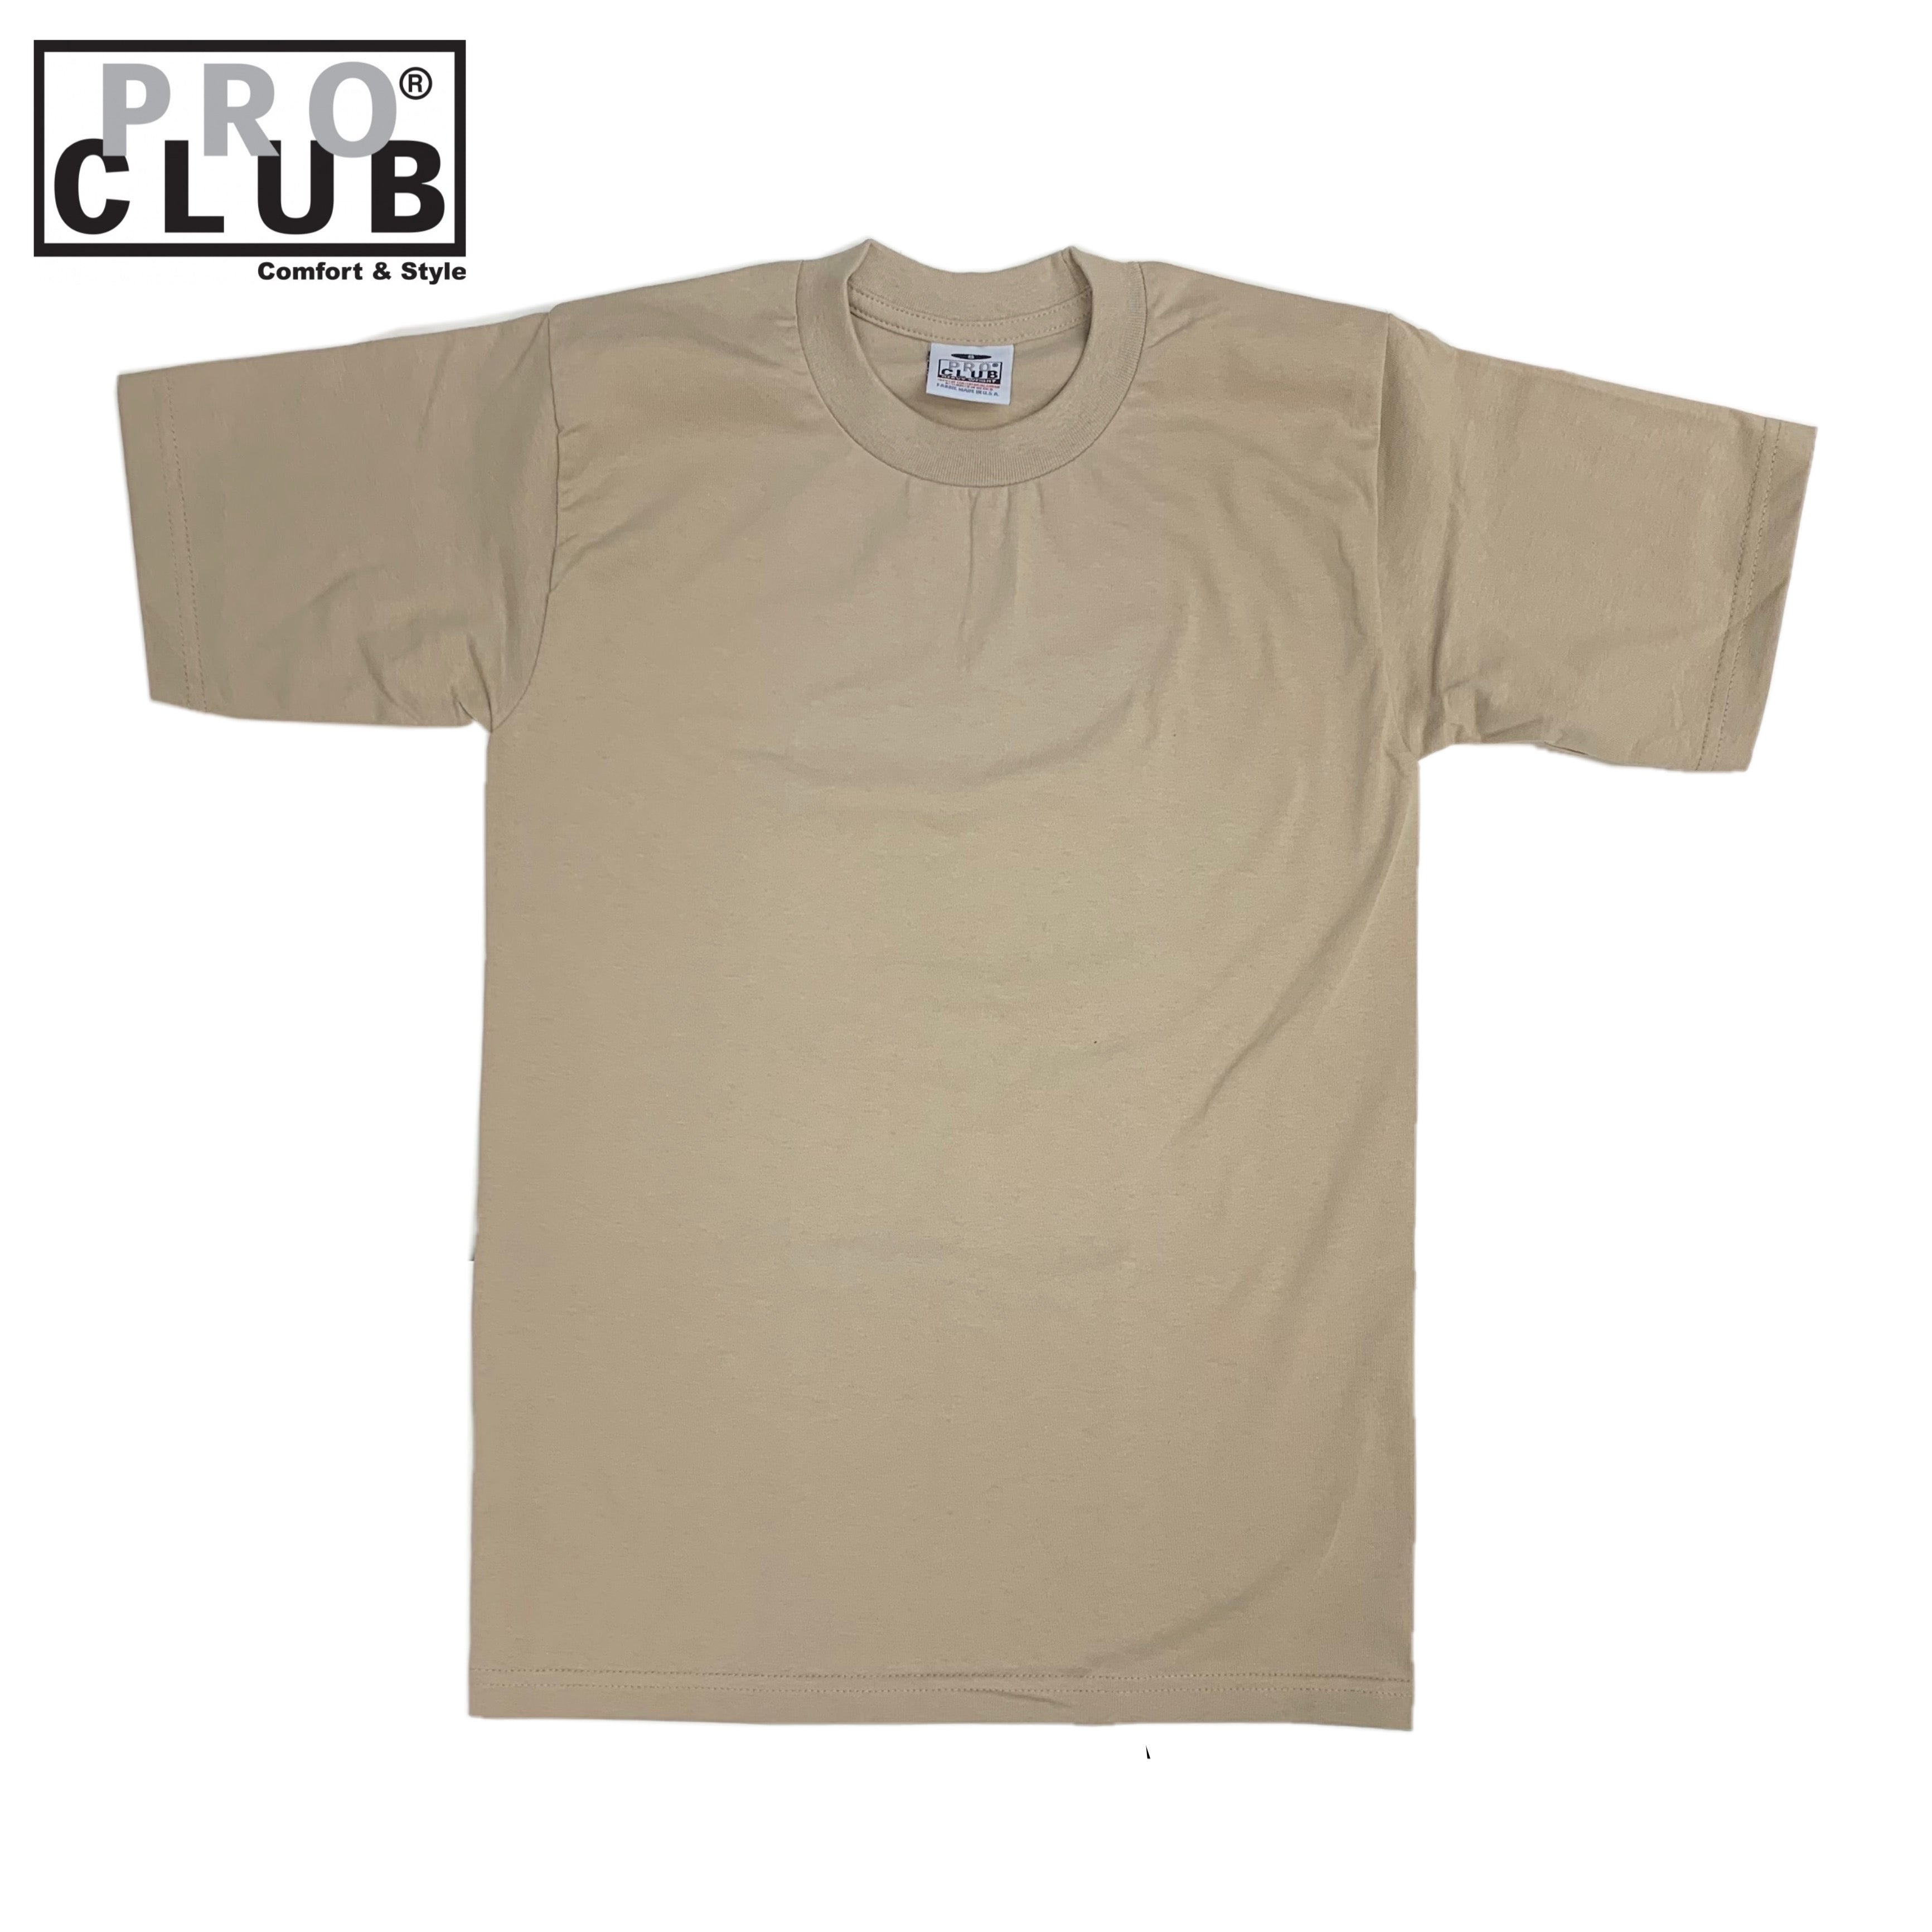 Shop Pro Club T-Shirts, Hoodies, Shorts, Heavyweight, Comfort, and More